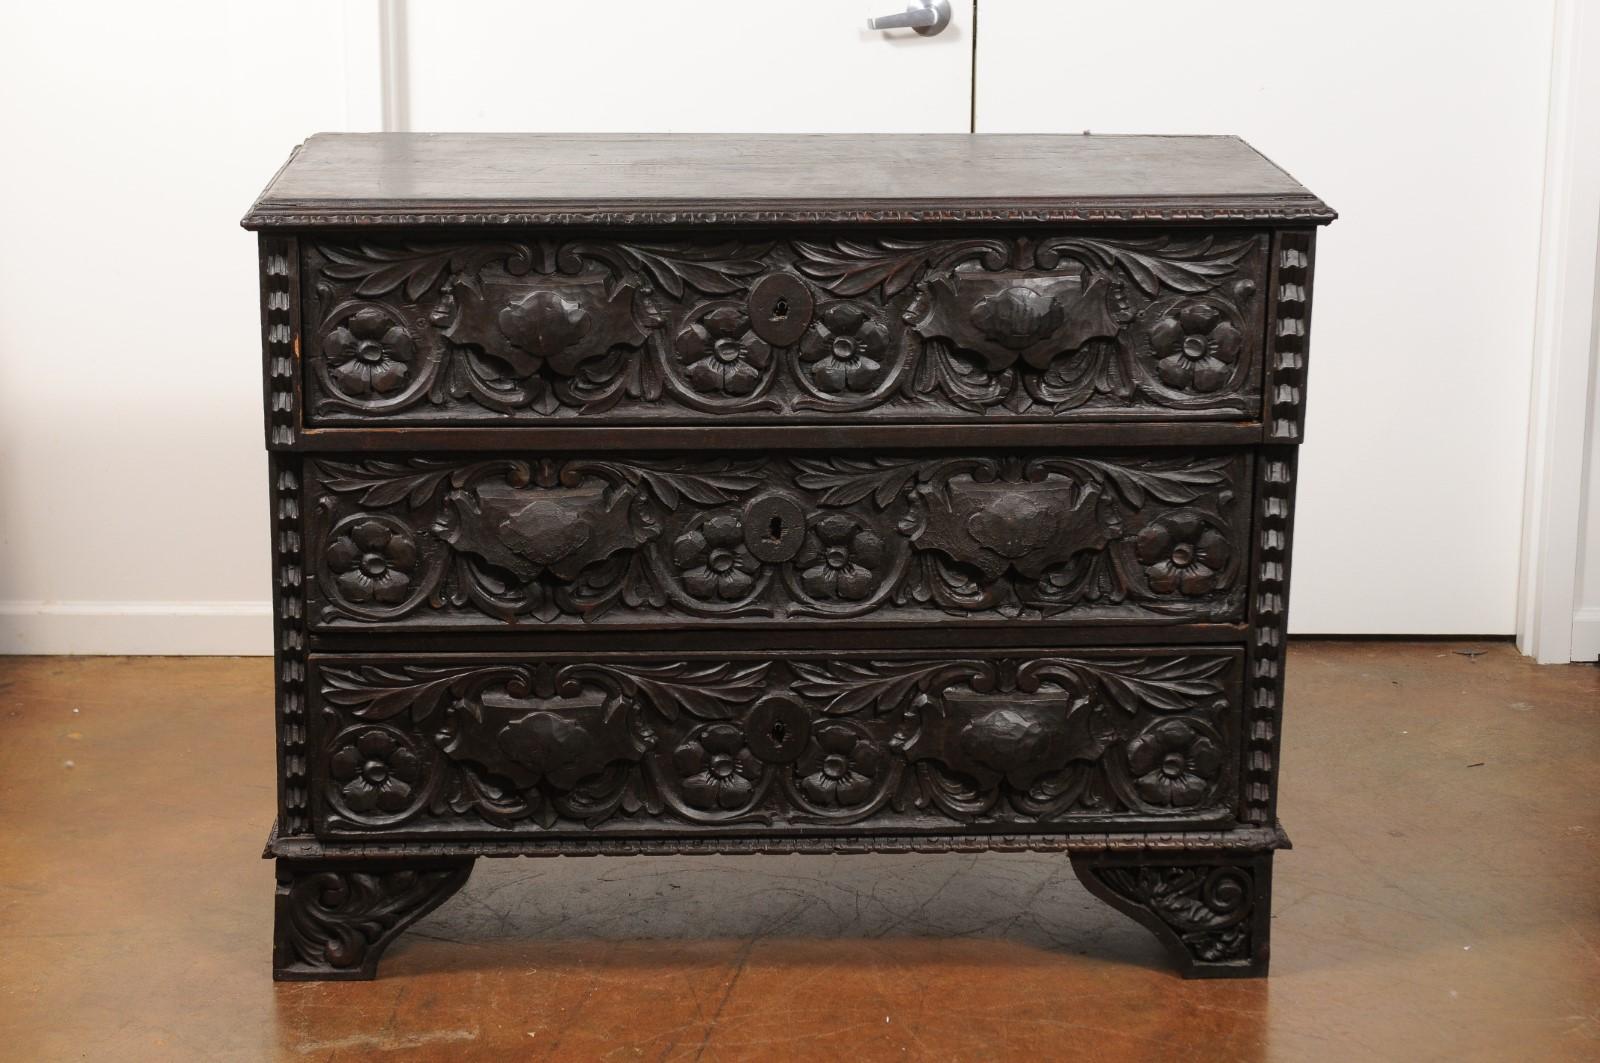 Italian 1860s Three-Drawer Commode with Hand-Carved Scrollwork and Dark Patina 2